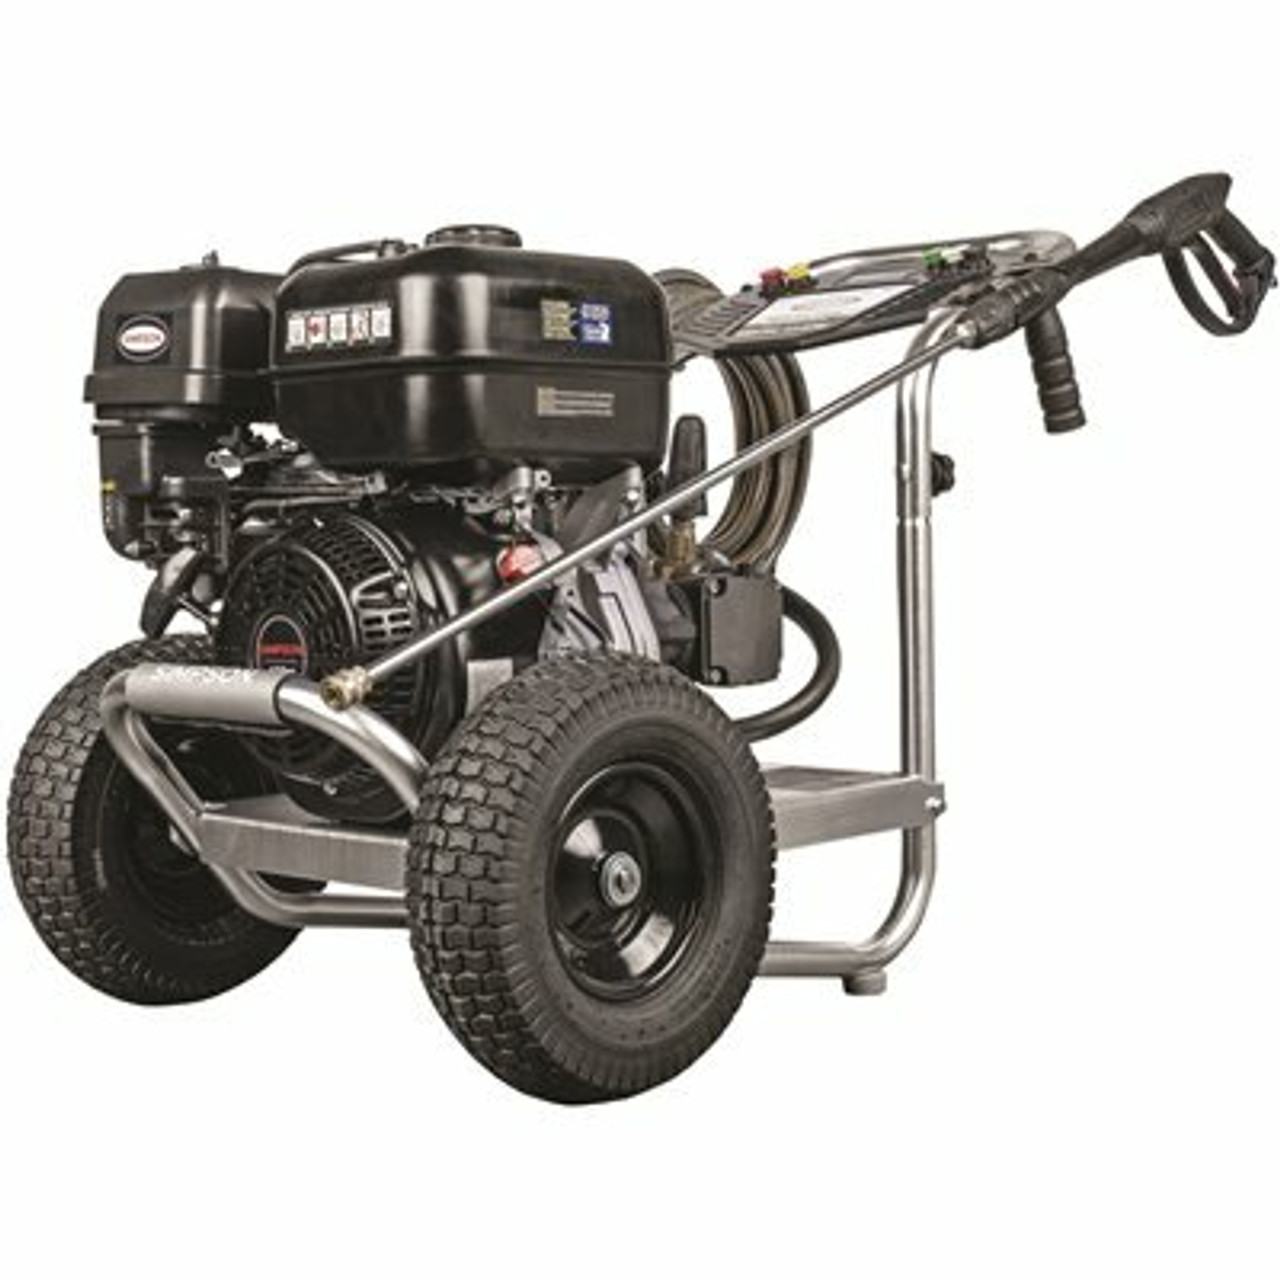 Simpson 4400 Psi 4.0 Gpm Gas Pressure Washer Powered By Simpson